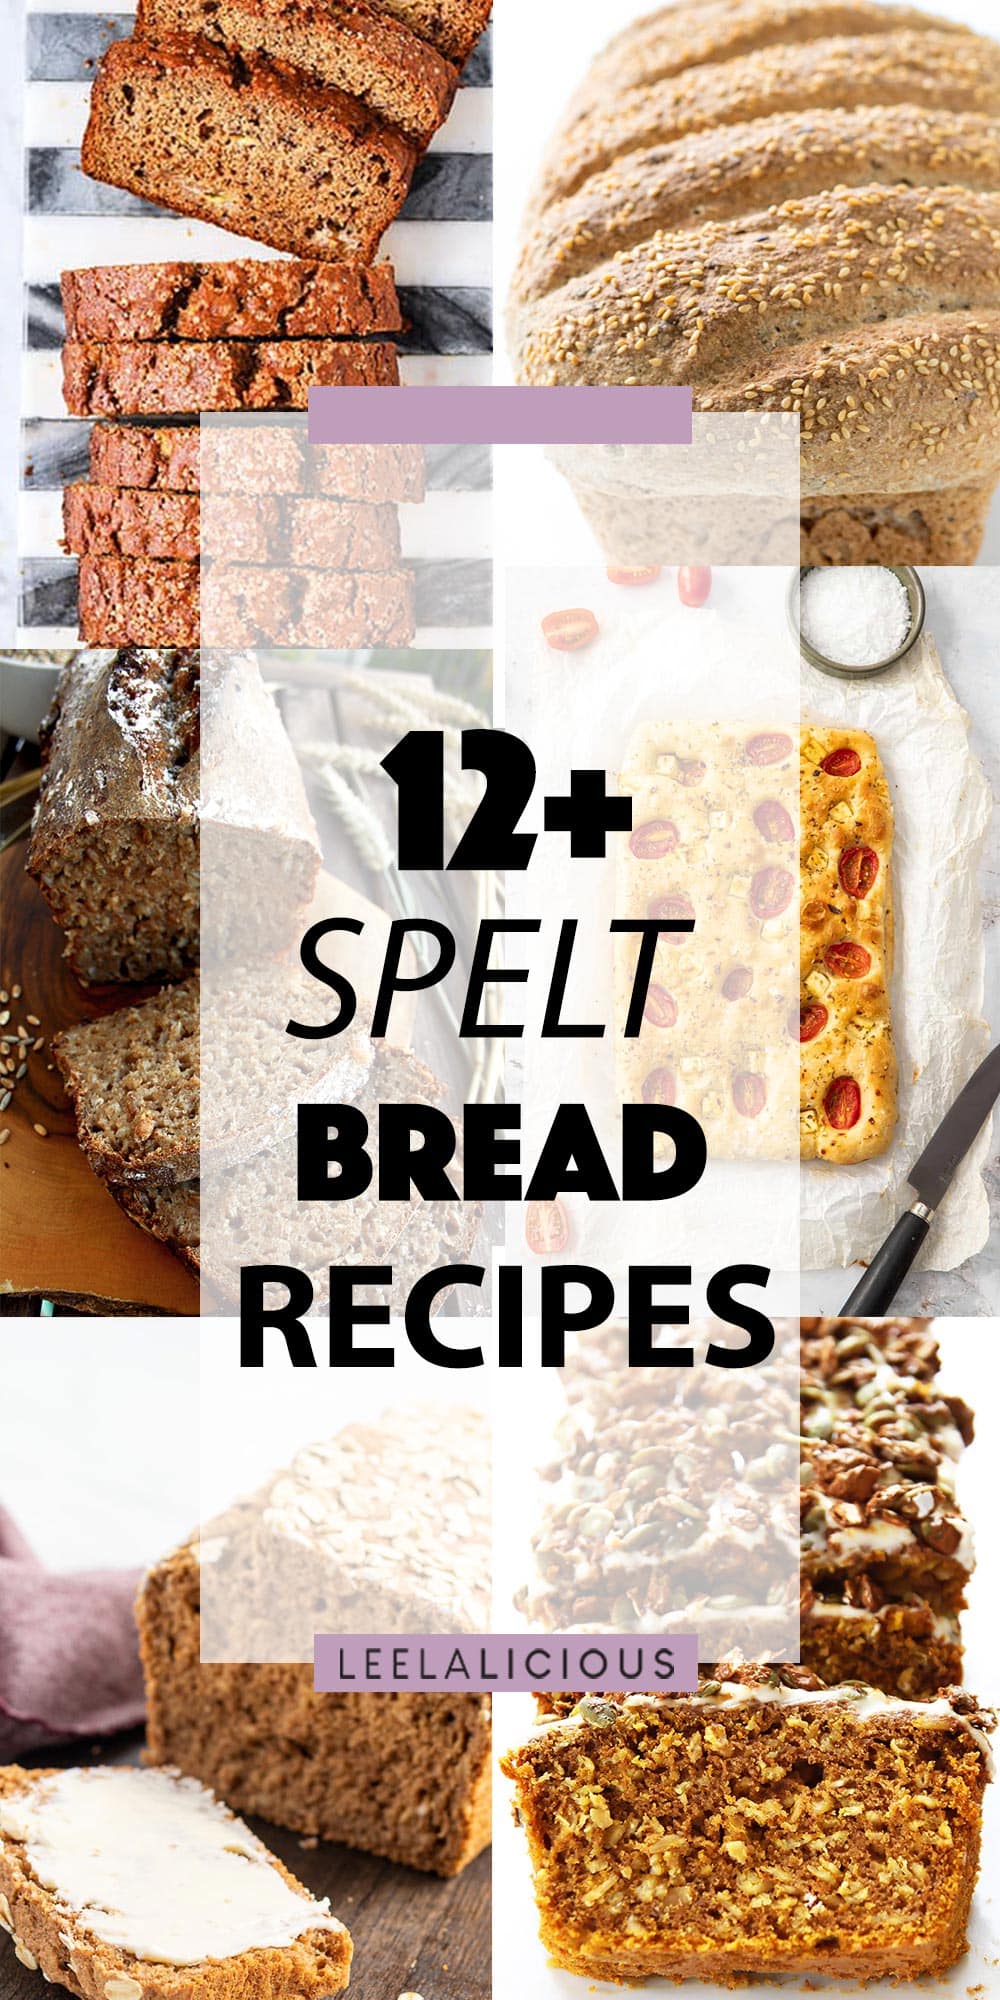 6 image collage of spelt bread recipes